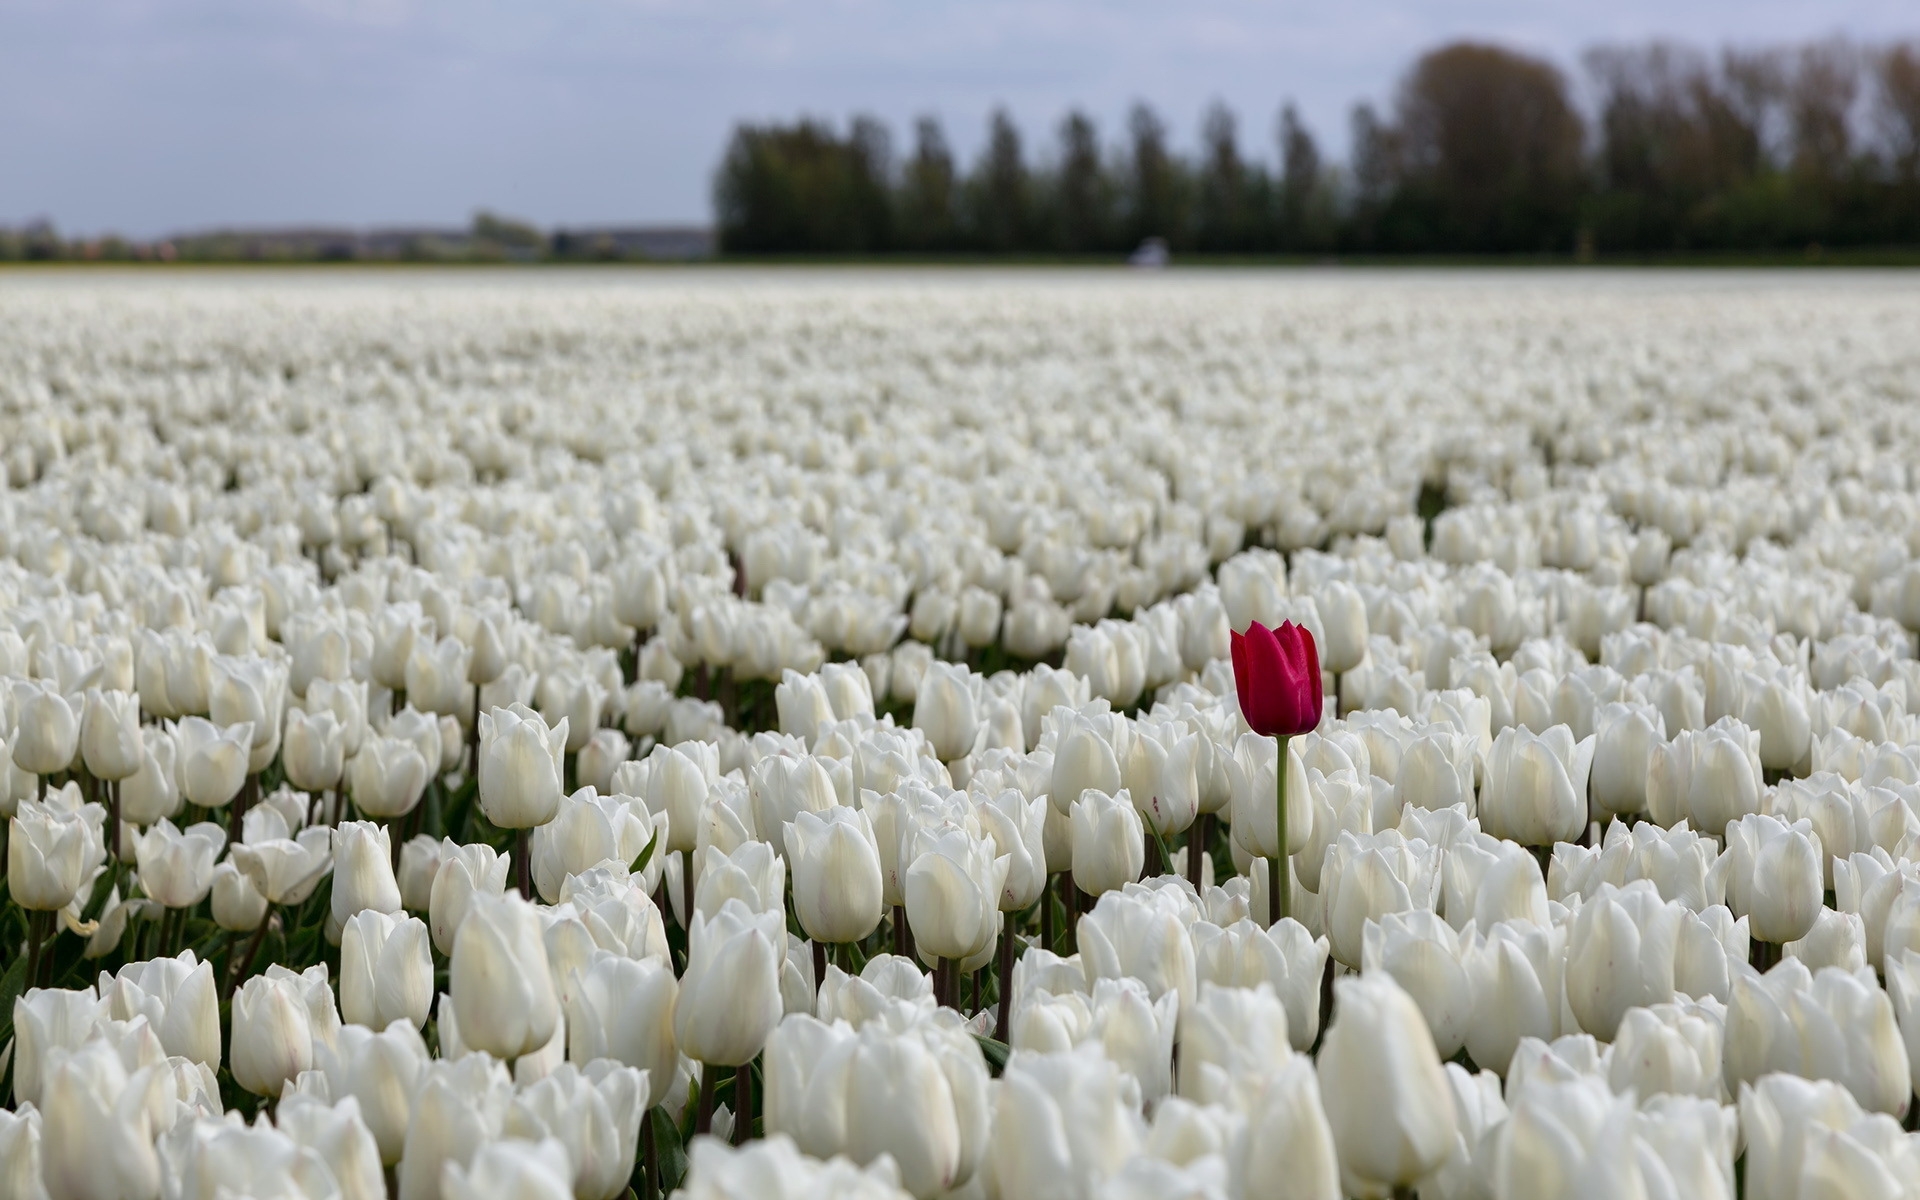 One red tulip amidst a field of white tulips